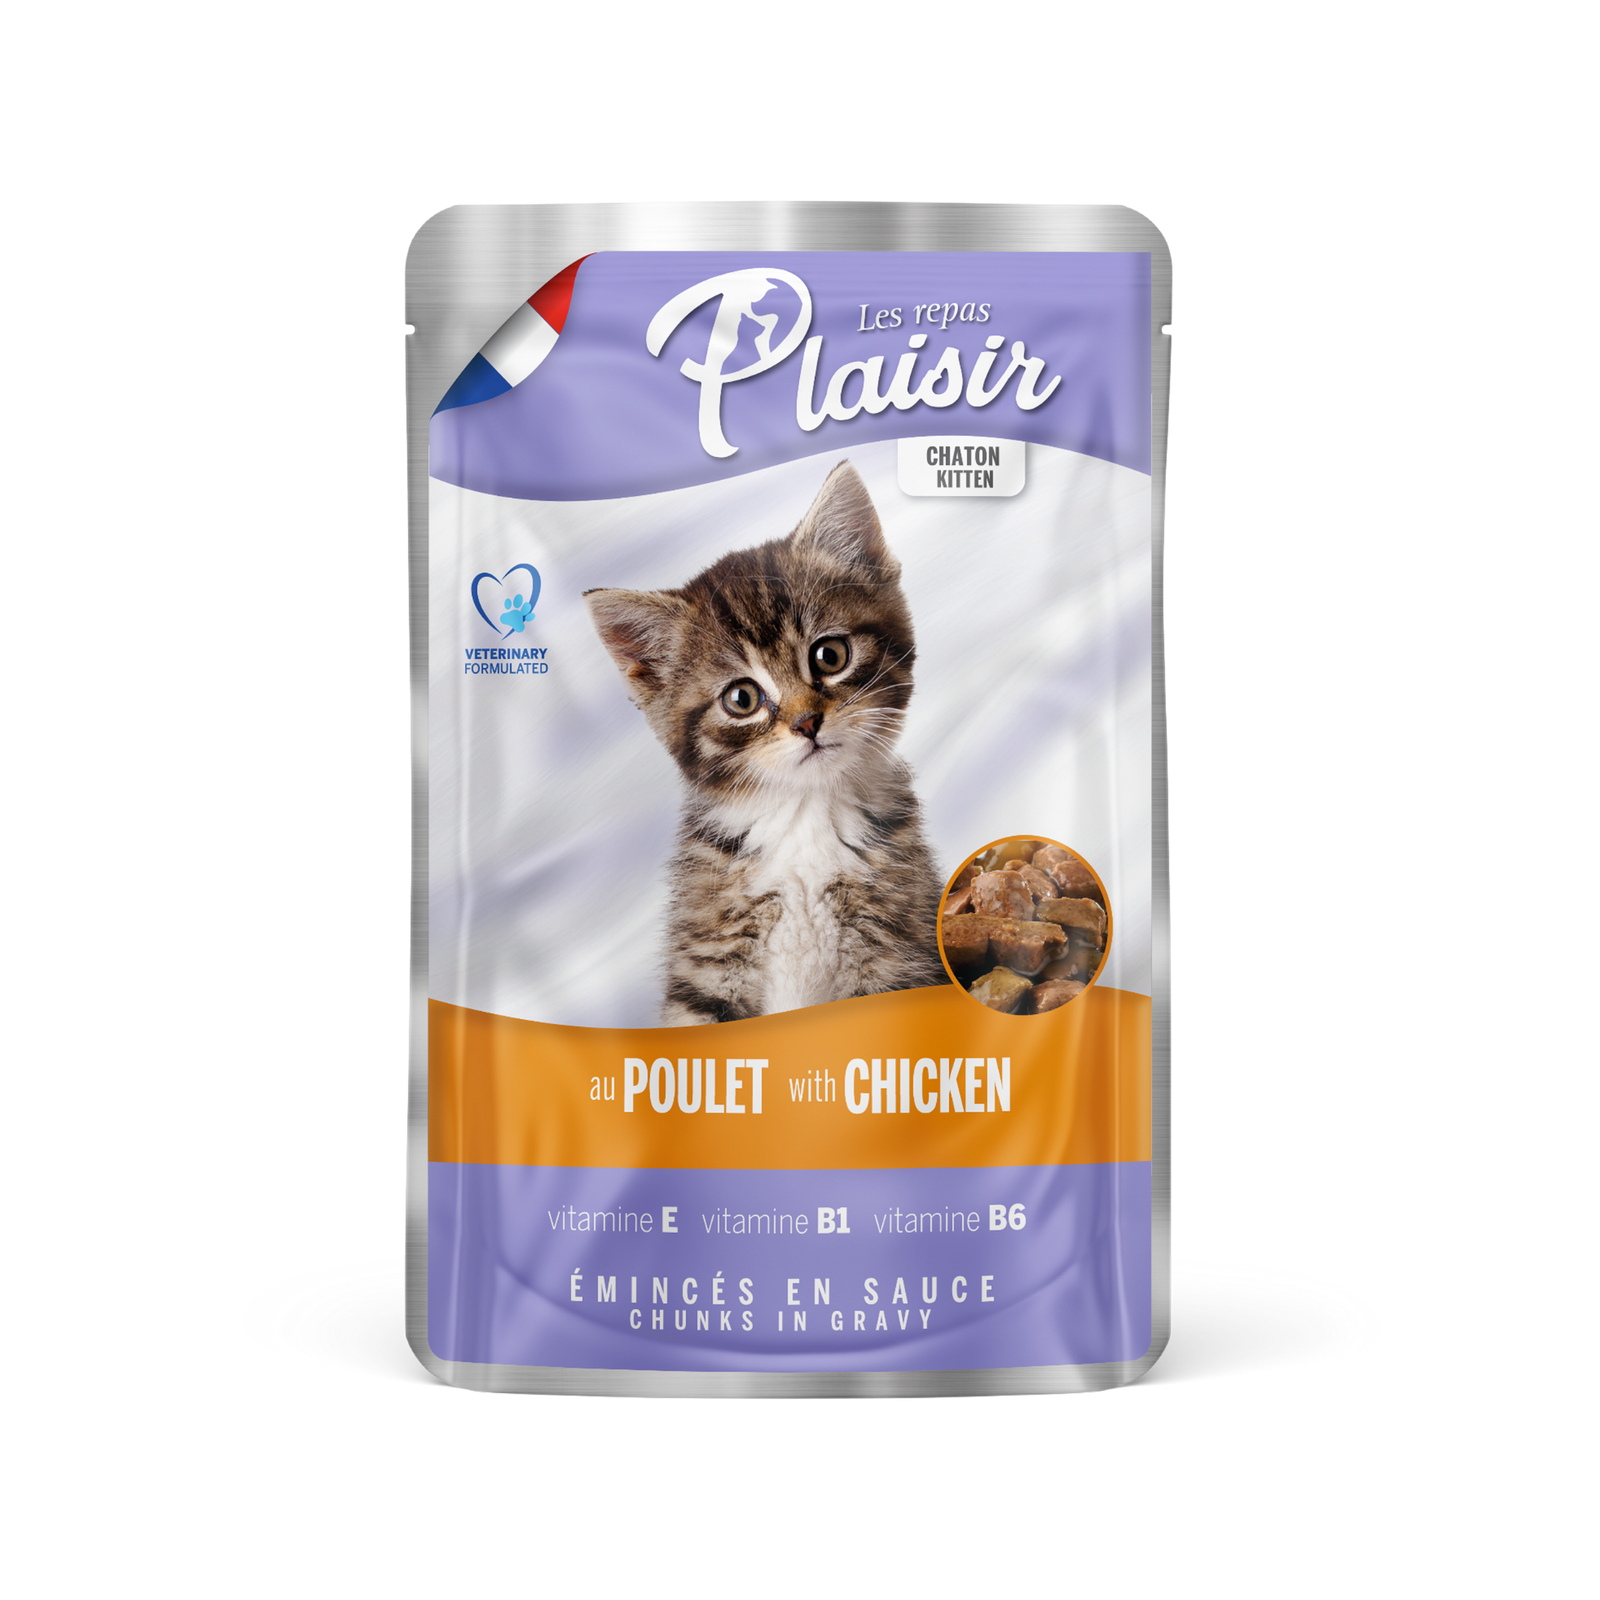 Repas au poulet pour chatons WHISKASMD PERFECT PORTIONSMD